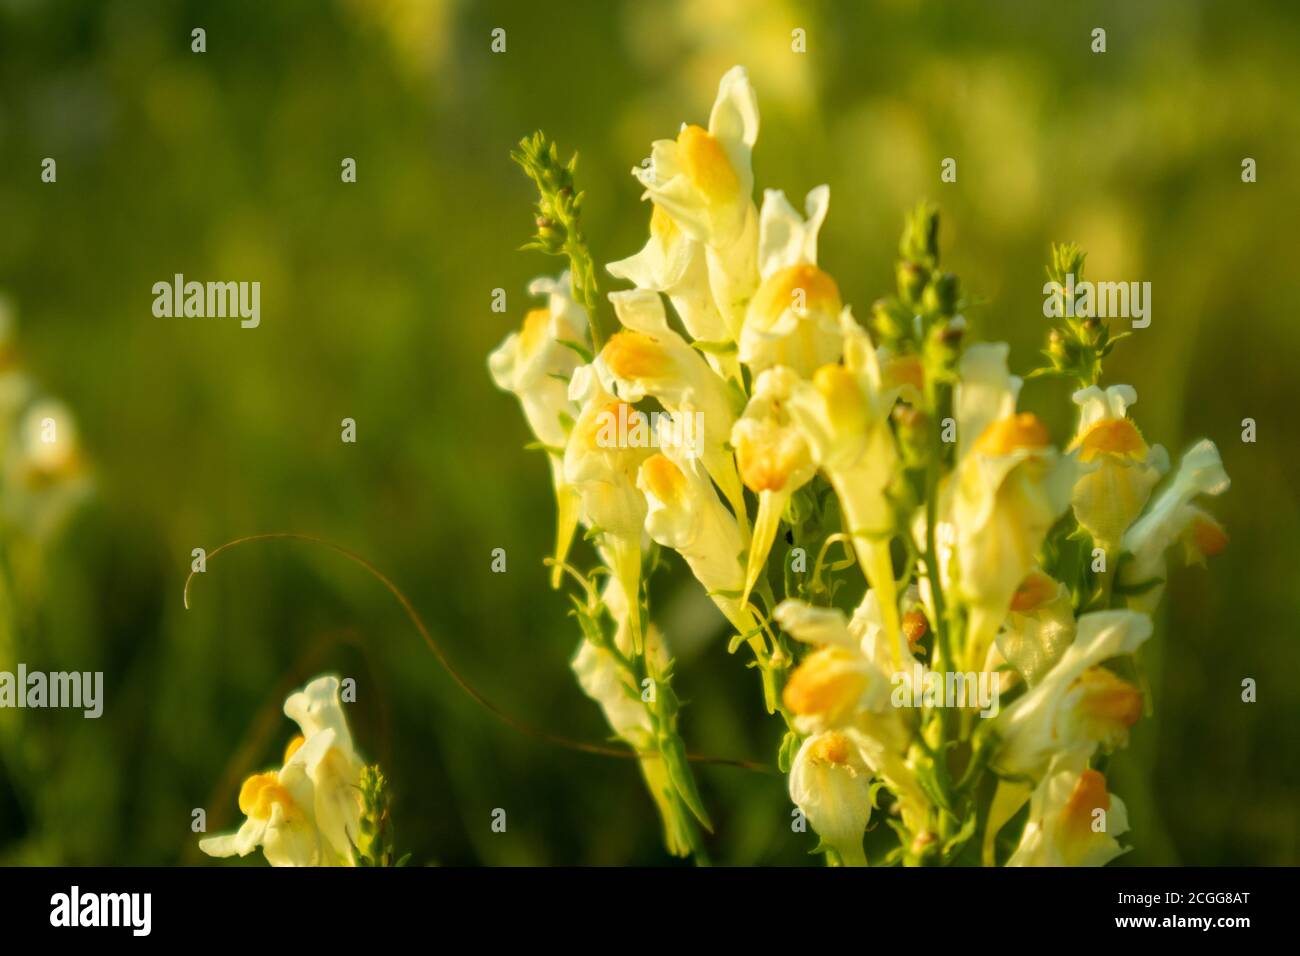 Linaria vulgaris or Butter and eggs, a species of toadflax. Close-up yellow flowers in green grass. Herbal medicine as tinctures and ointments. Select Stock Photo